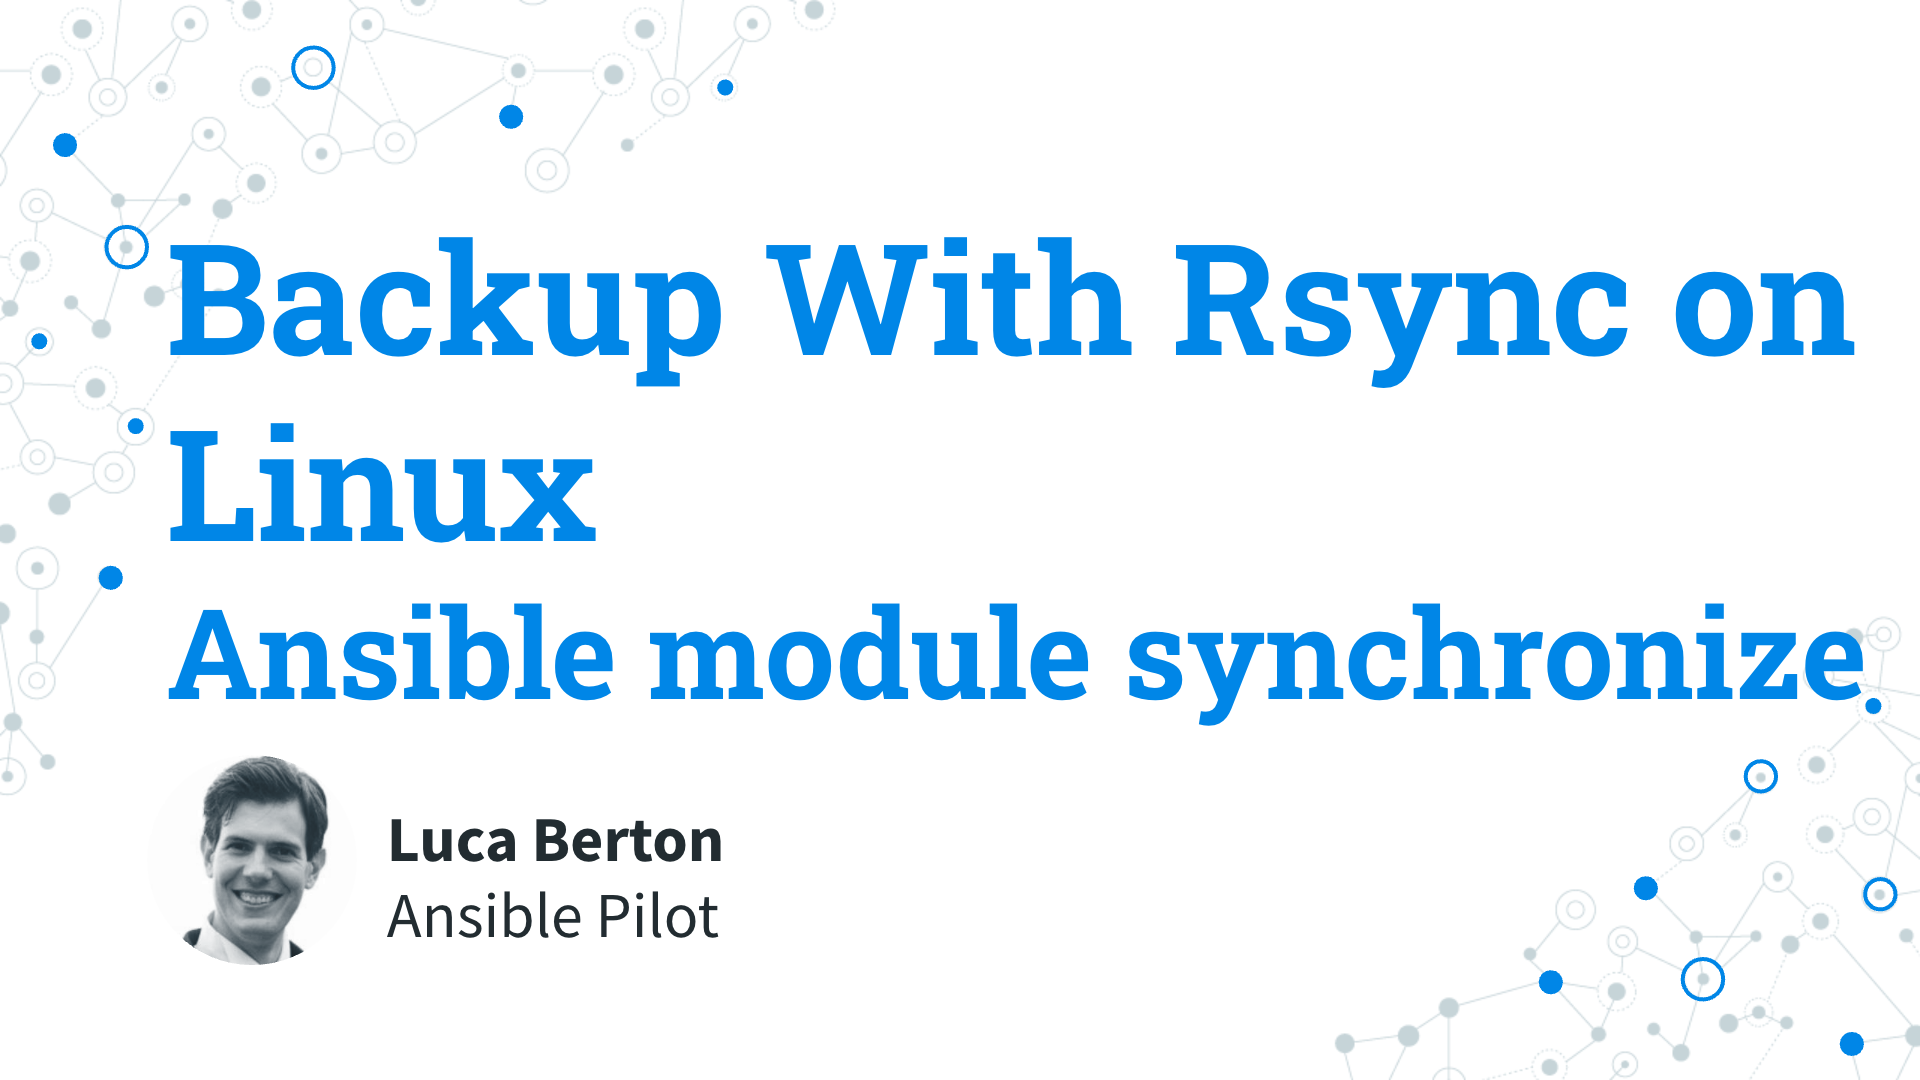 Backup With Rsync - Local to Remote - Ansible module synchronize